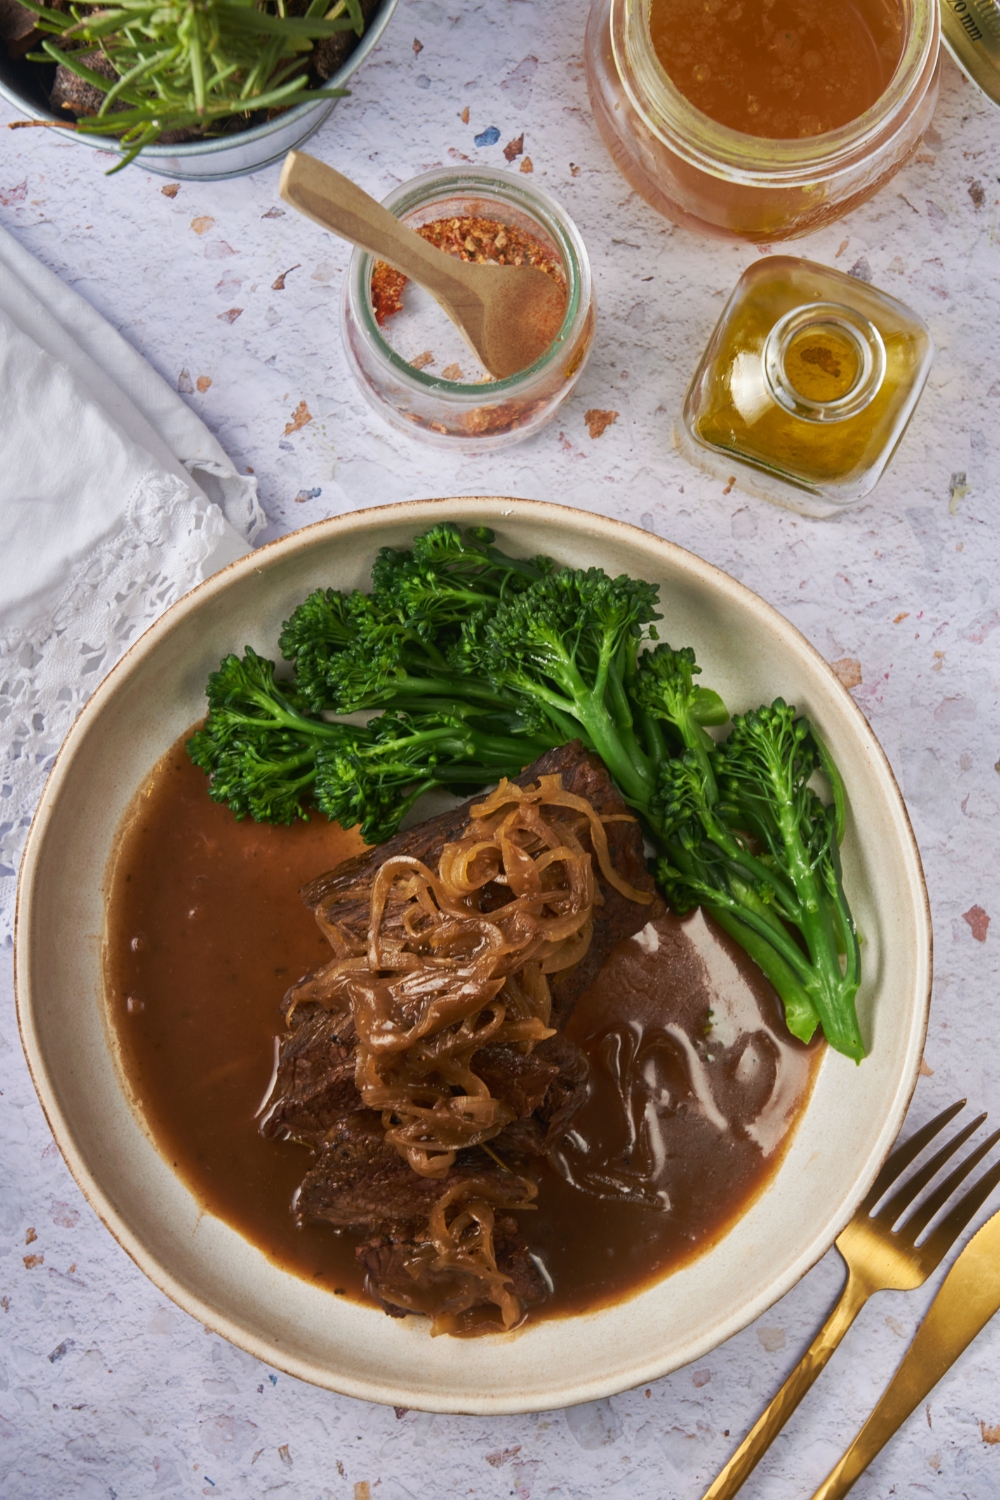 Overhead view of a sirloin roast topped with caramelized onions and covered in a brown gravy, with a side of broccoli.